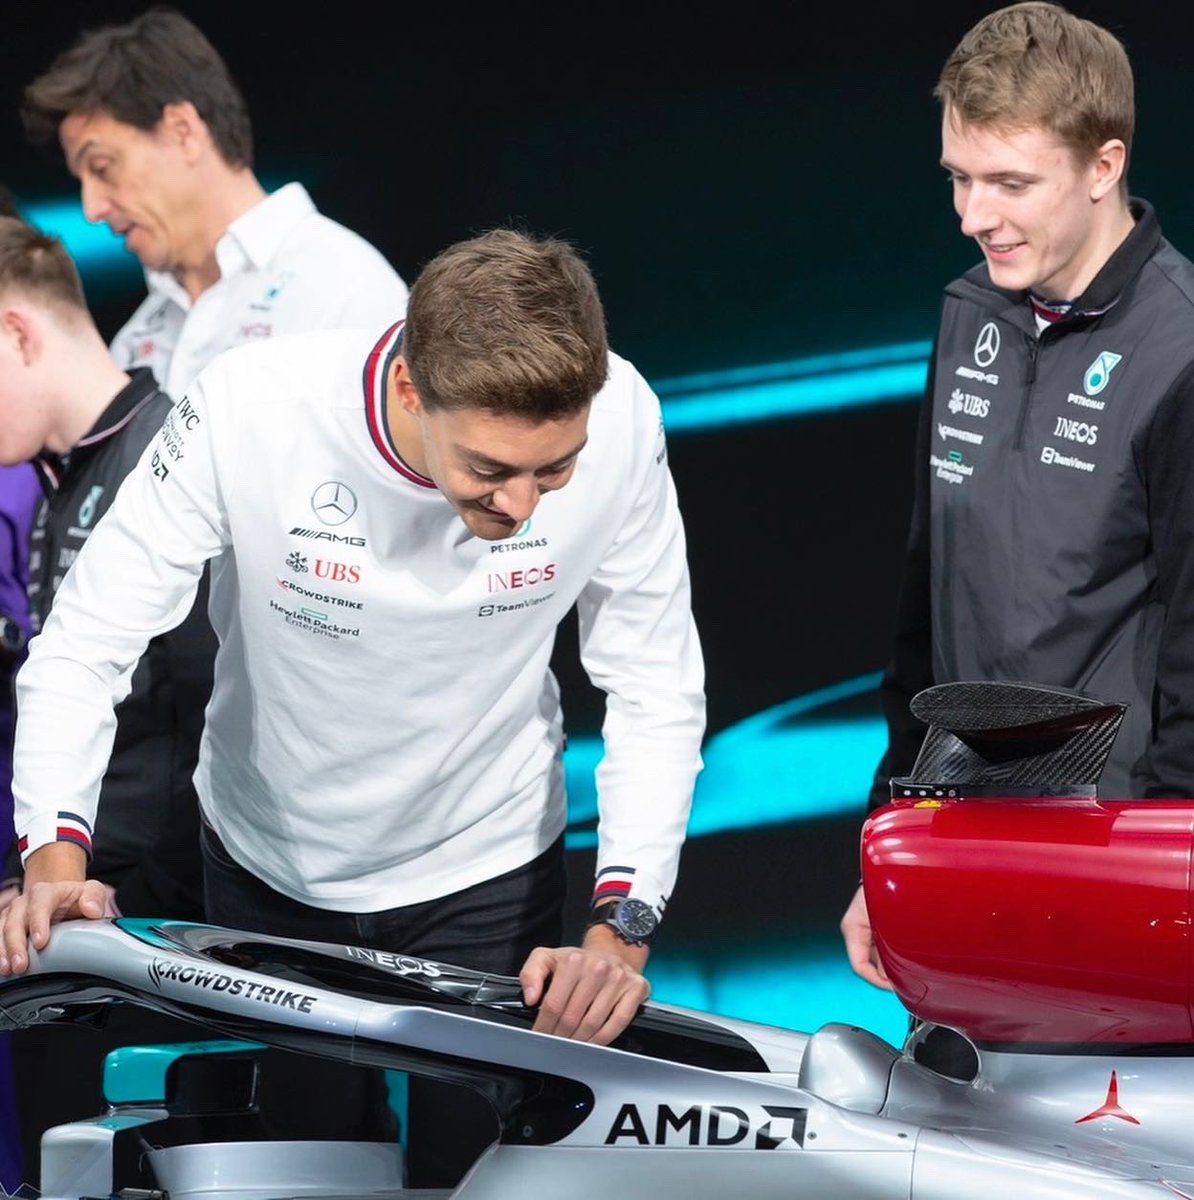 A childhood dream coming true! On the 22. of November I will complete my first ever running in a @MercedesAMGF1 formula 1 car at the Young Driver Test in Abu Dhabi!⭐️ It’s an incredible sign of trust from Mercedes which I like to thank Mercedes for!